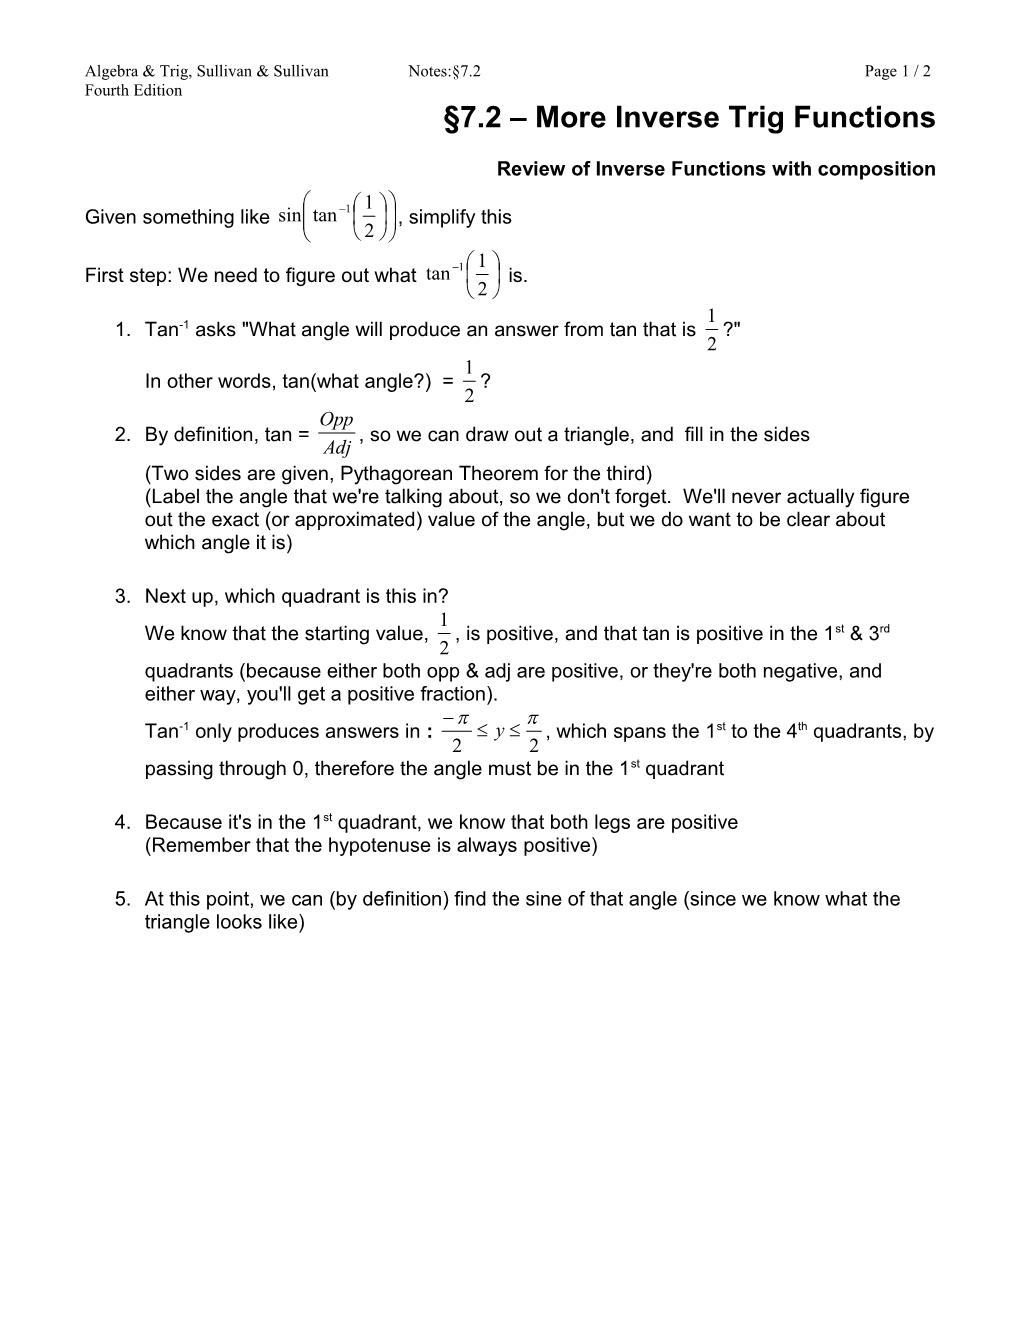 7.2 More Inverse Trig Functions